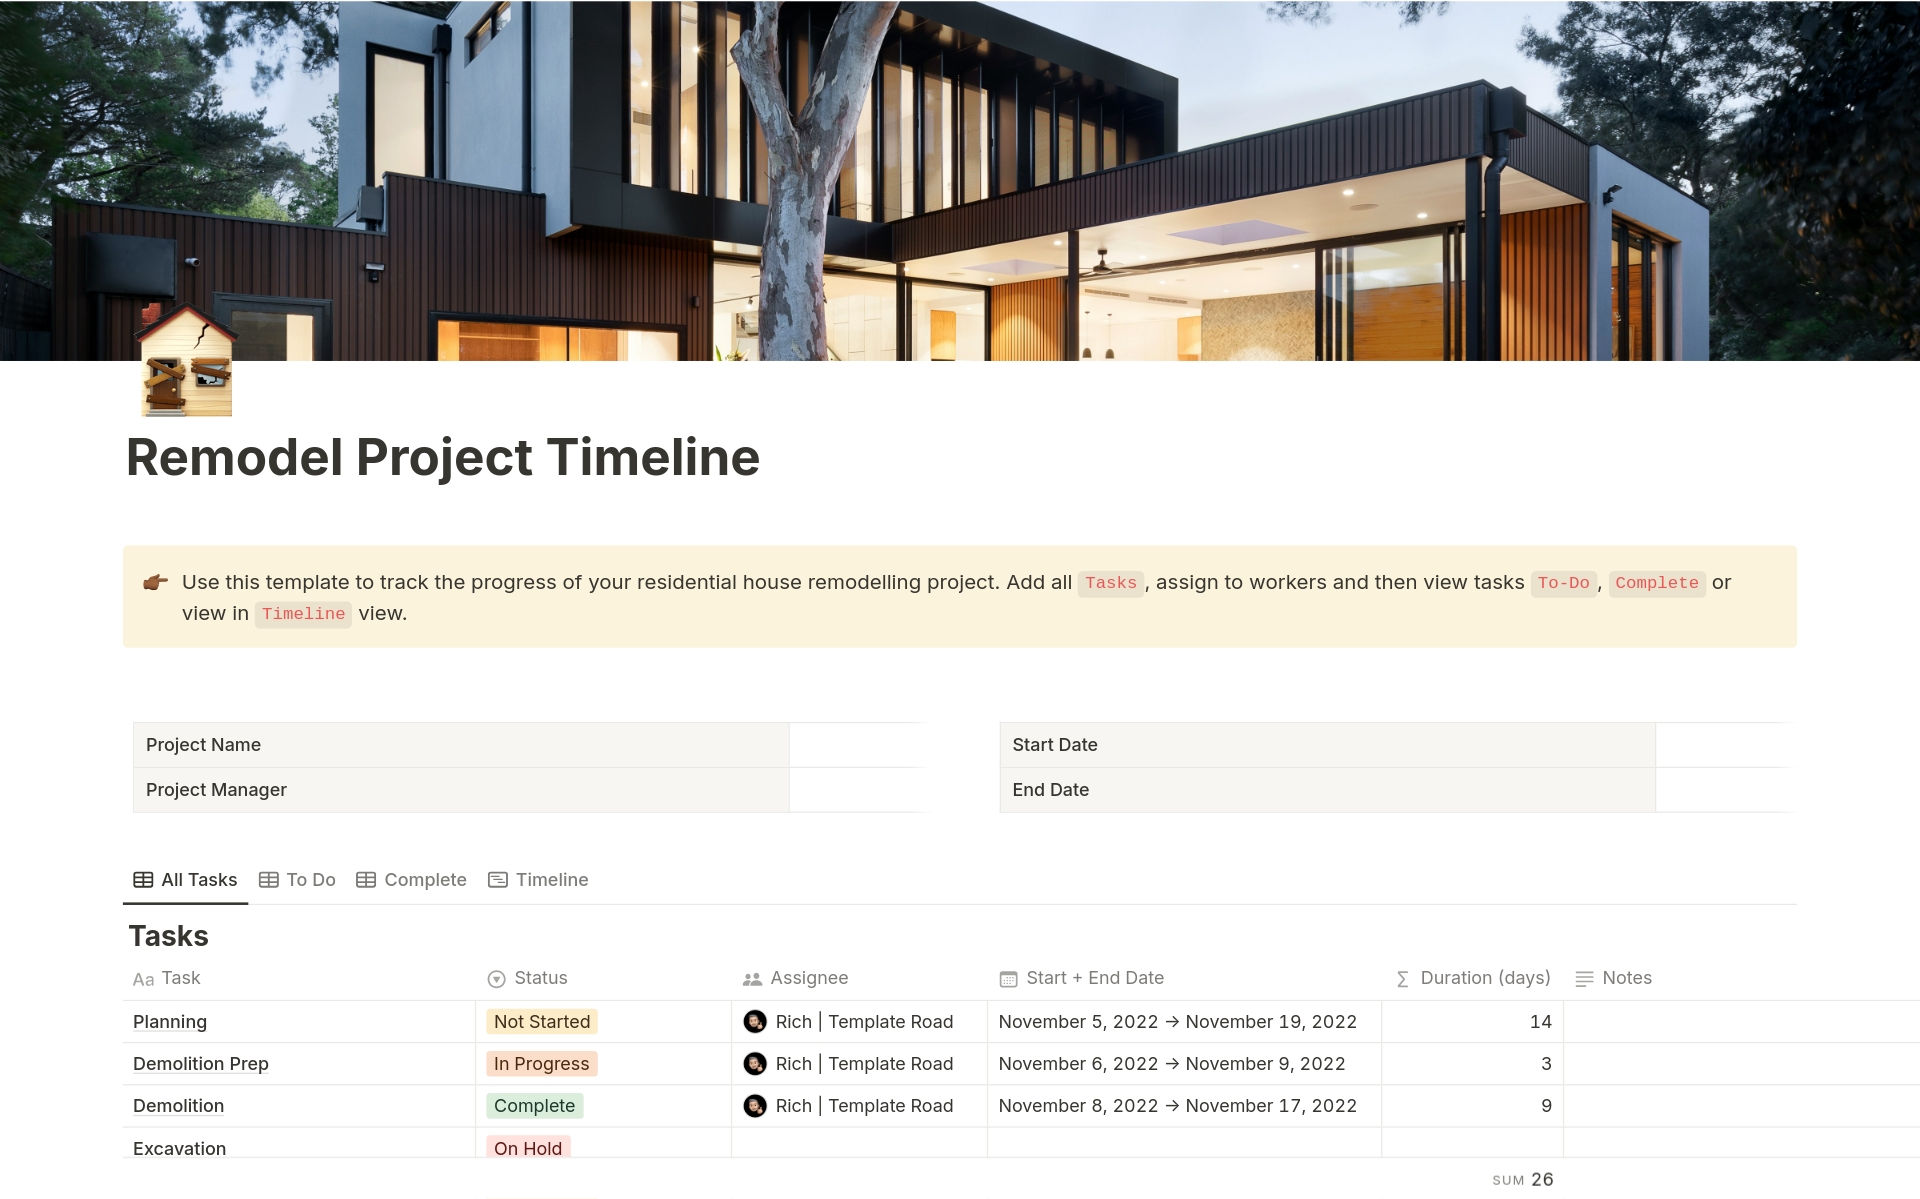 A template preview for Remodel Project Timeline